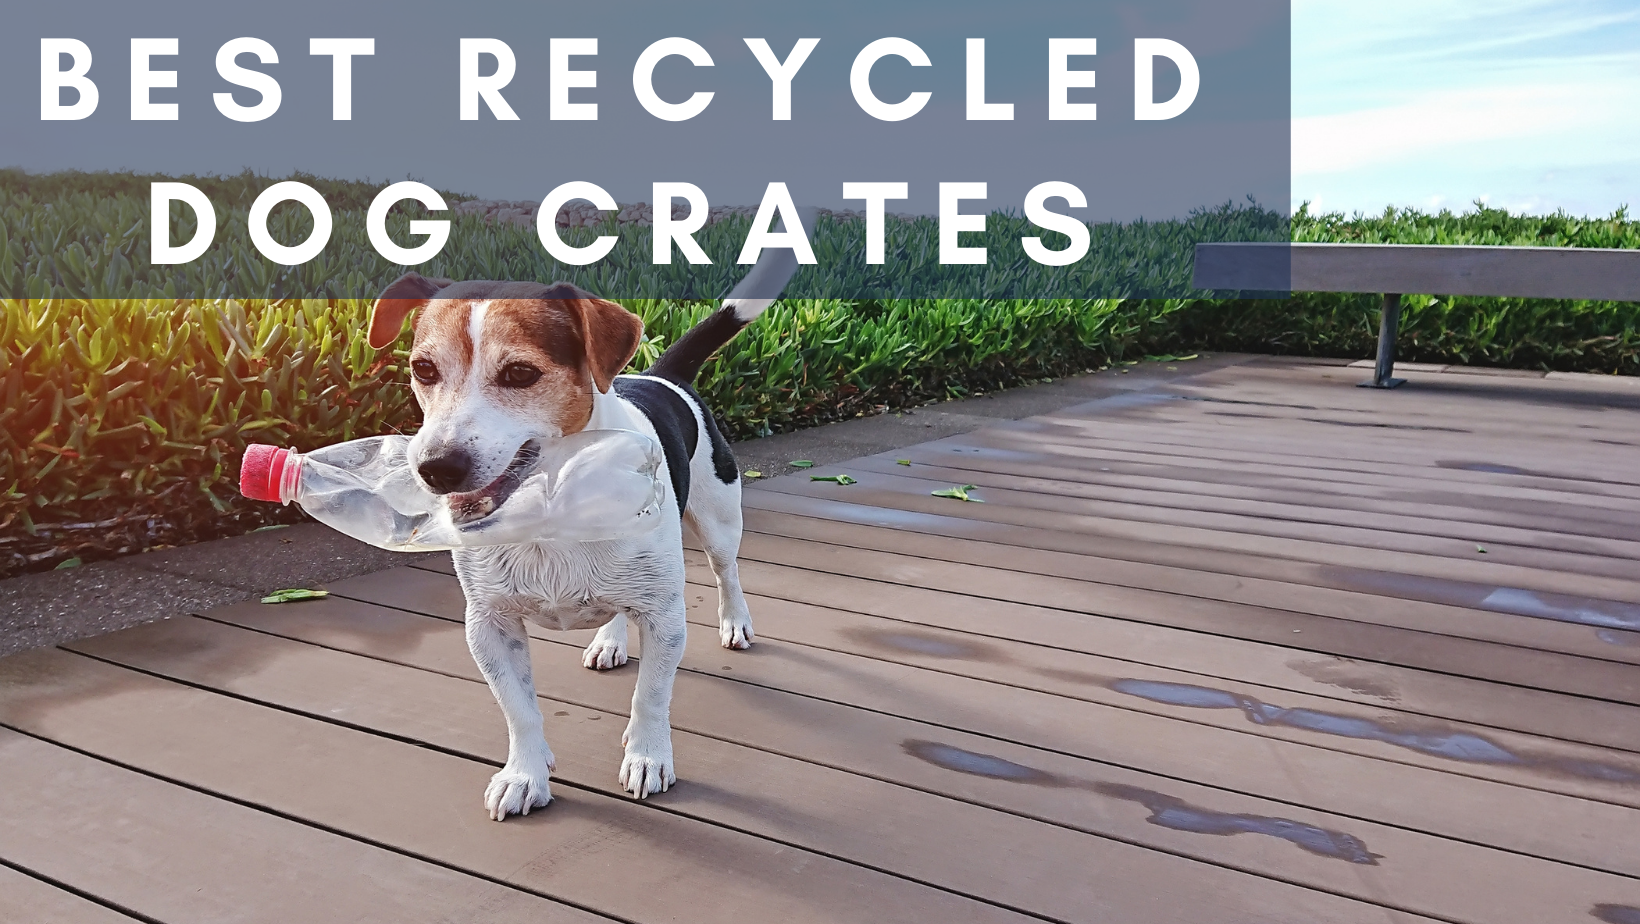 Best Recycled Dog Crates